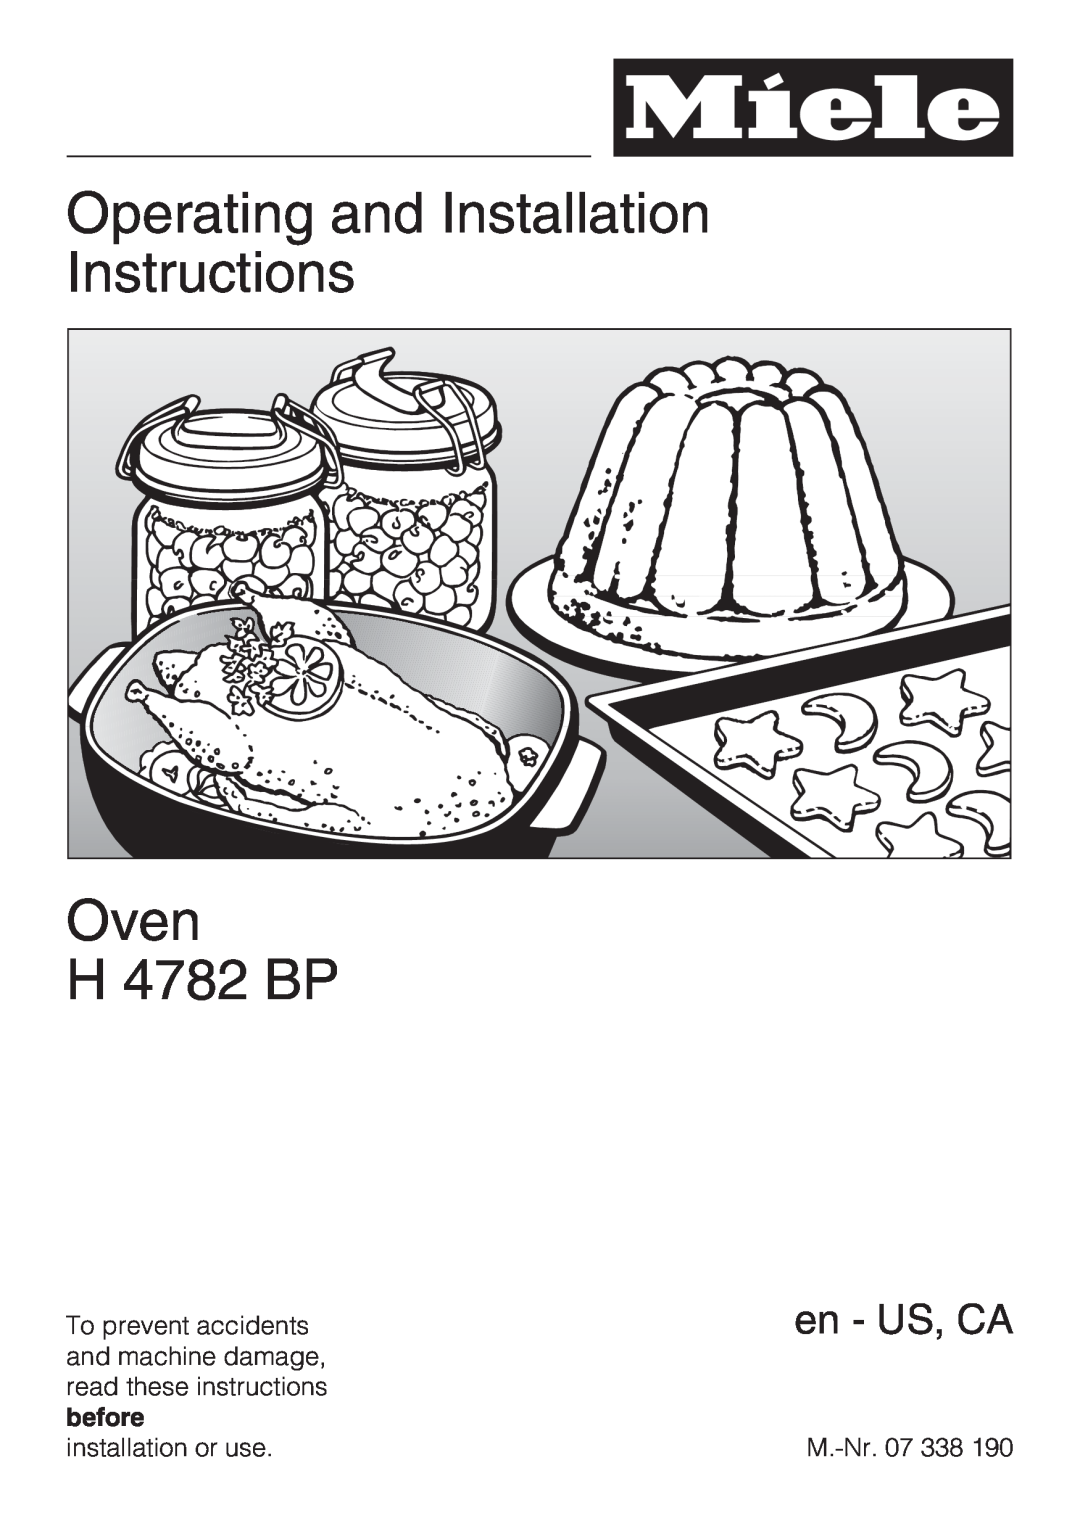 Miele H4782BP installation instructions Operating and Installation Instructions Oven, H 4782 BP, en - US, CA 